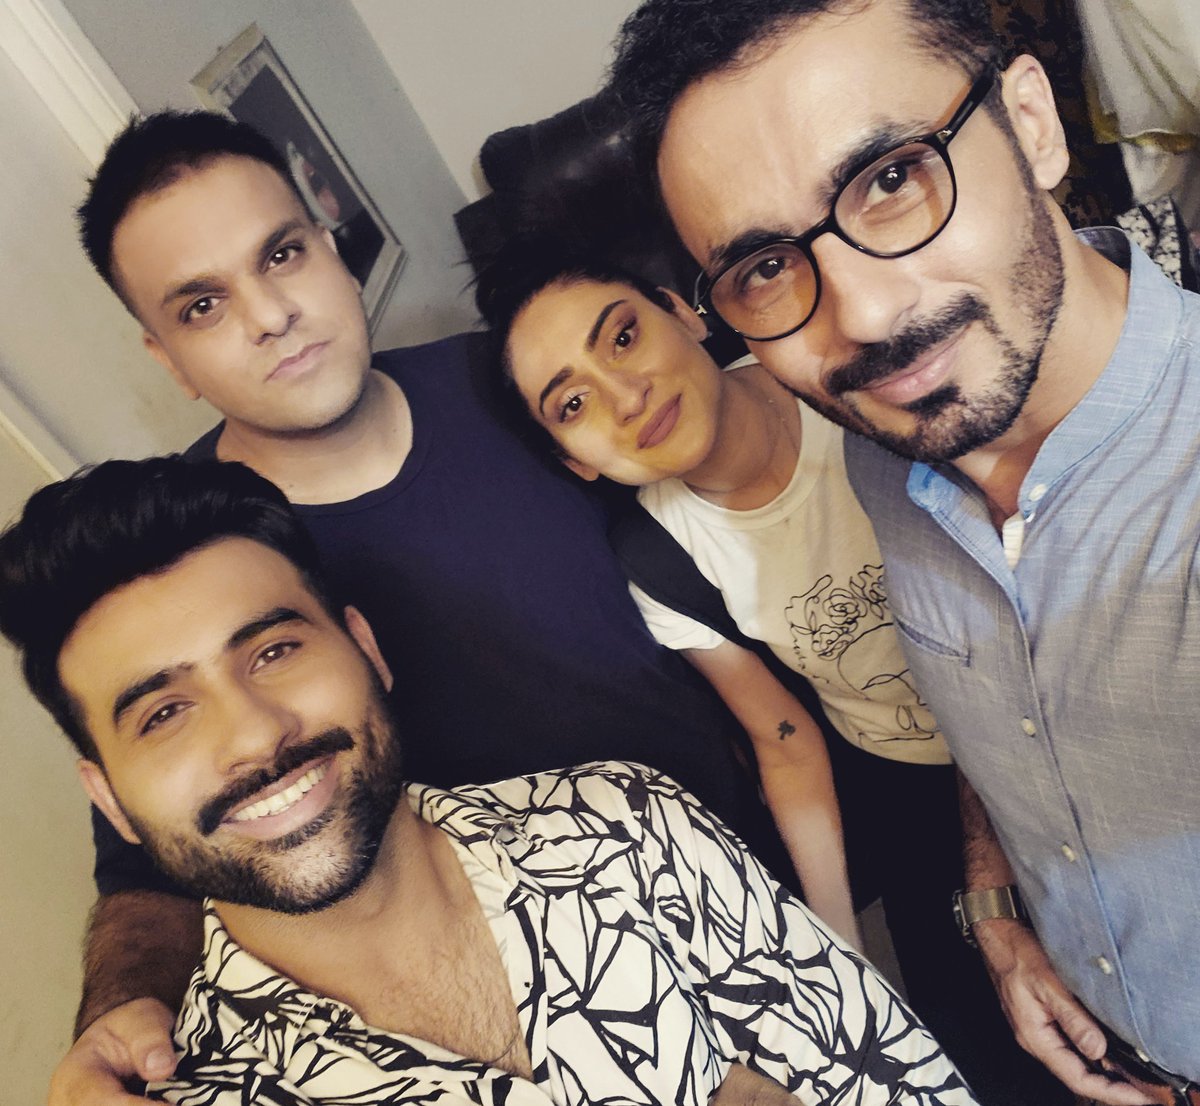 #packup #selﬁe 
All The Best for the New Big Hit as an Actor and Director #FaizanShaikh . And Aadi for the Challenging Character.🙂❤
Its always pleasure to work with you guys @aadiadealamjad and @mfaizansk . ❤🙂🙏 @sanaaskari_official u r an amazing actor and person.🙂